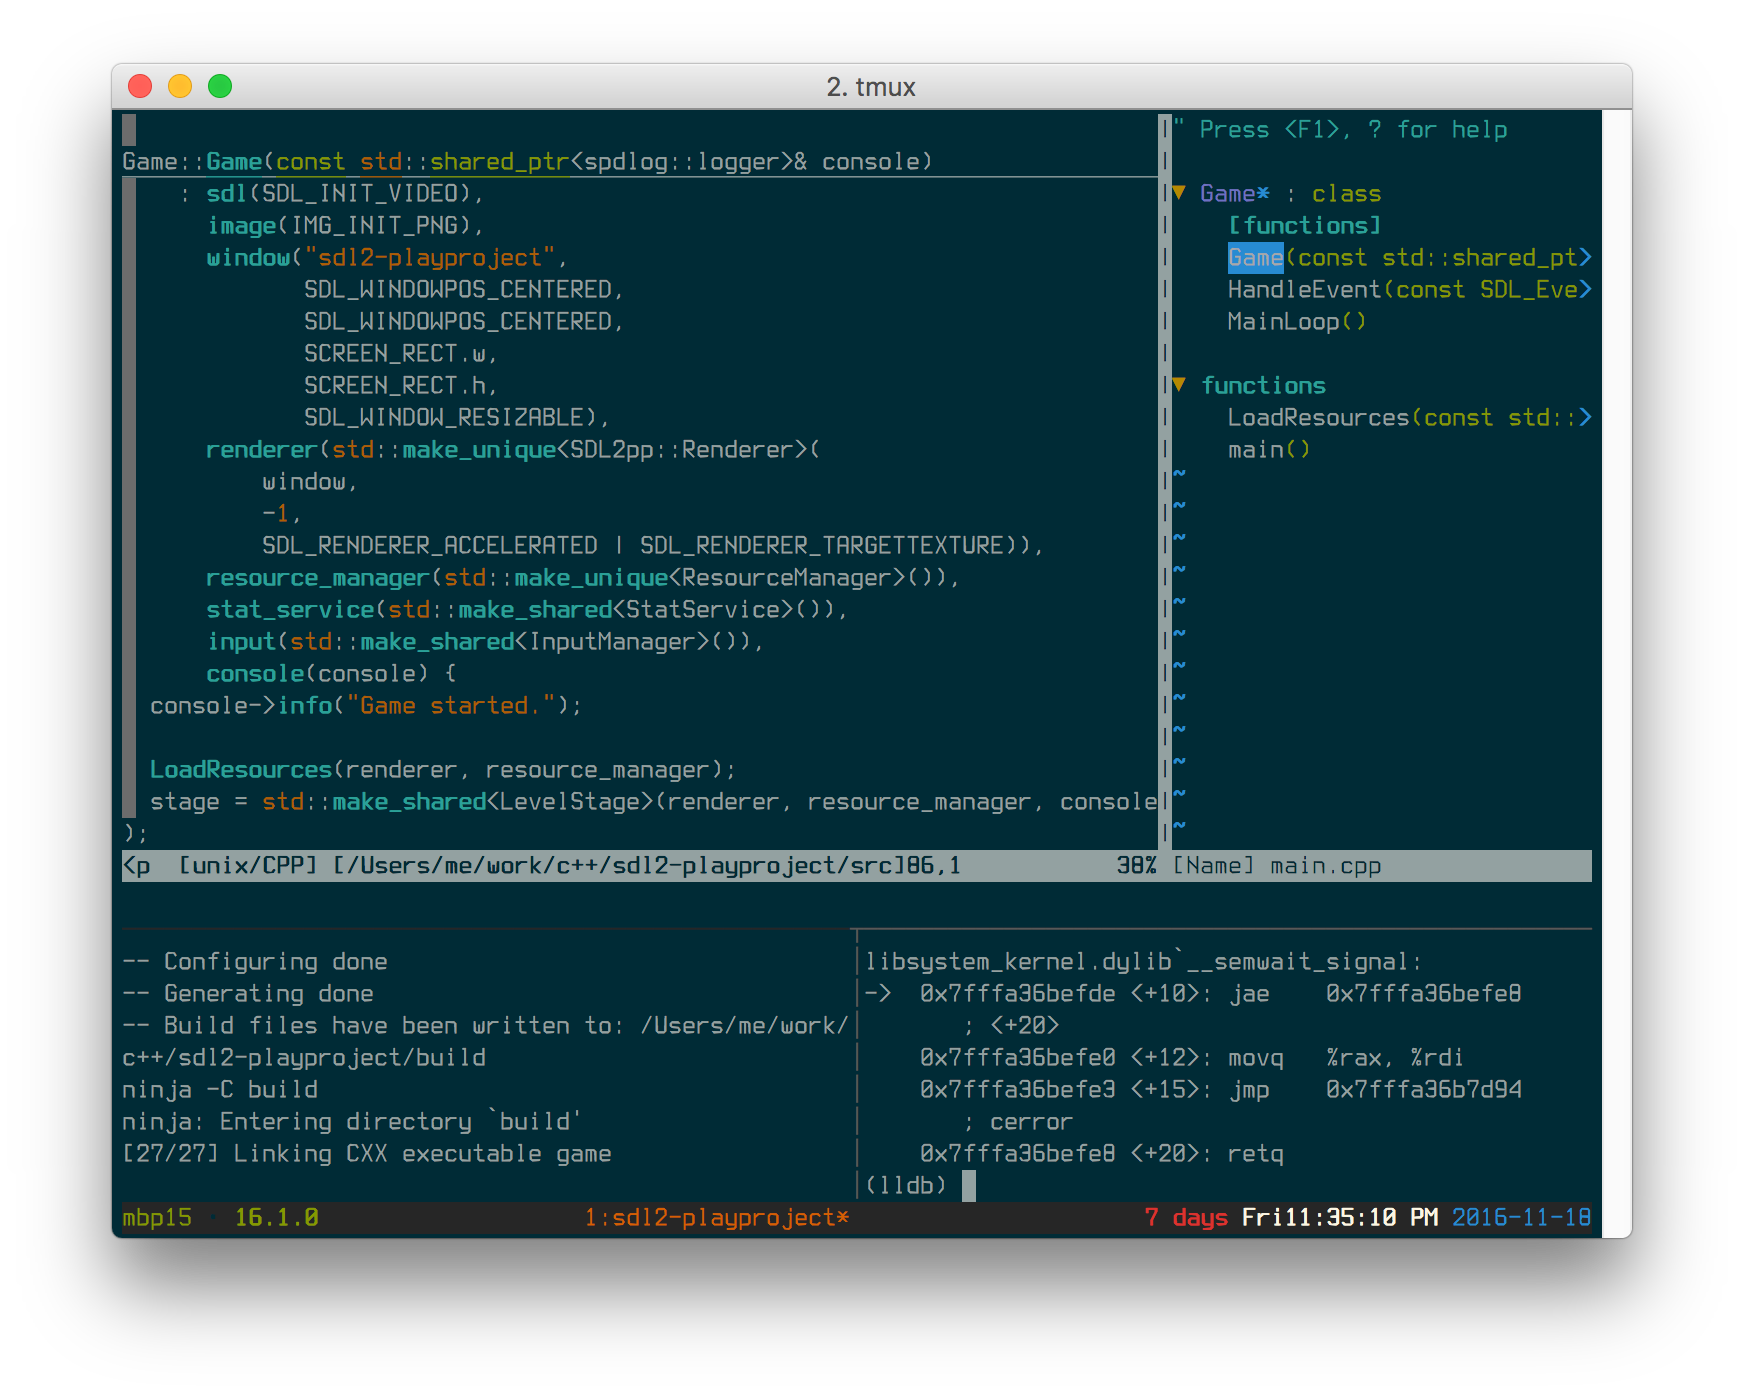 vim + building a C++ project w/ CMake + Ninja using entr to rebuild on file changes, LLDB bottom right